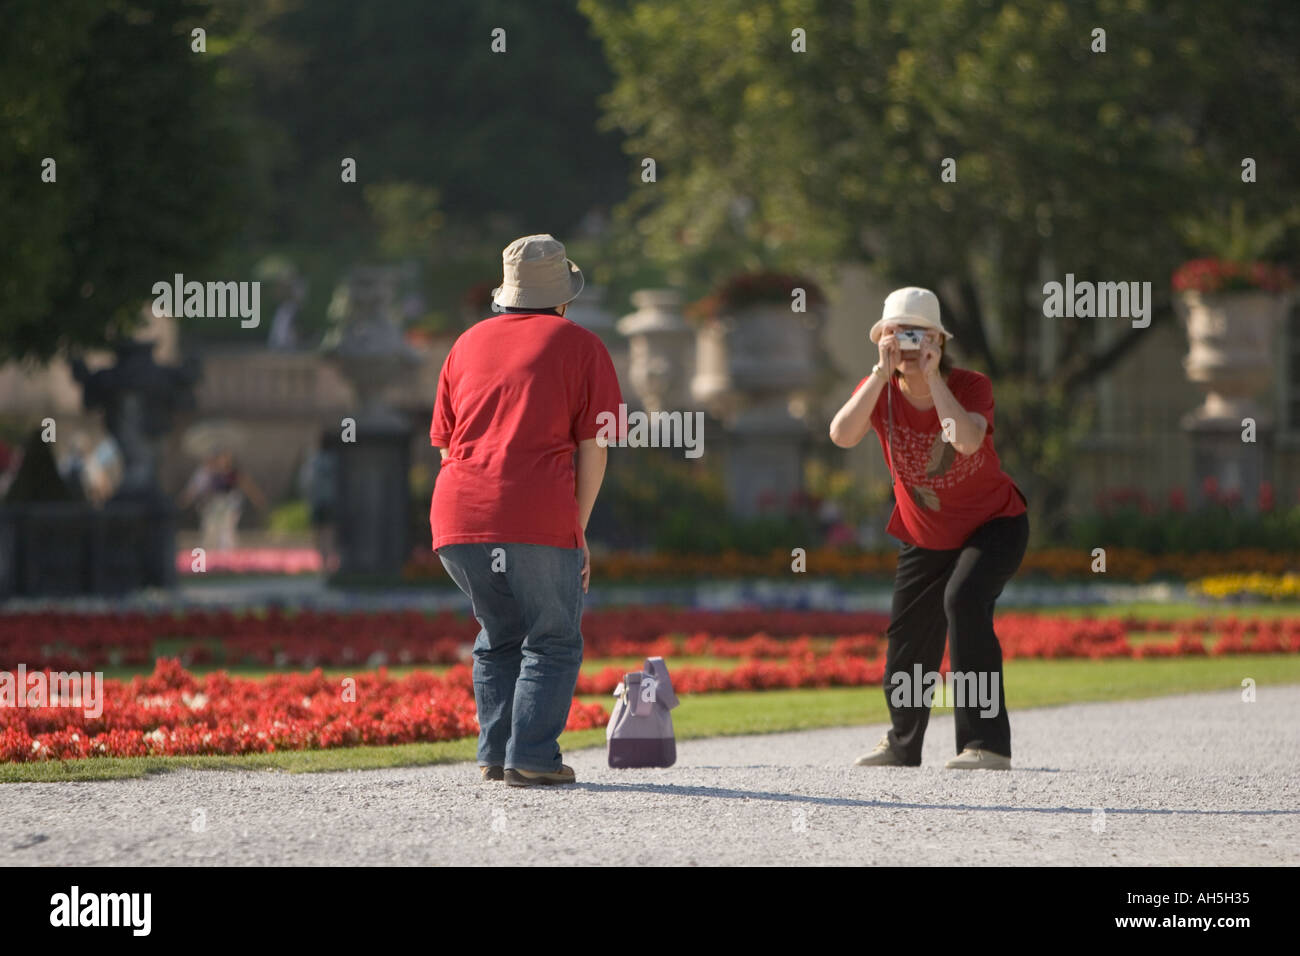 Two Japanese ladies taking a photo of each other in matching clothes red t shirts Stock Photo